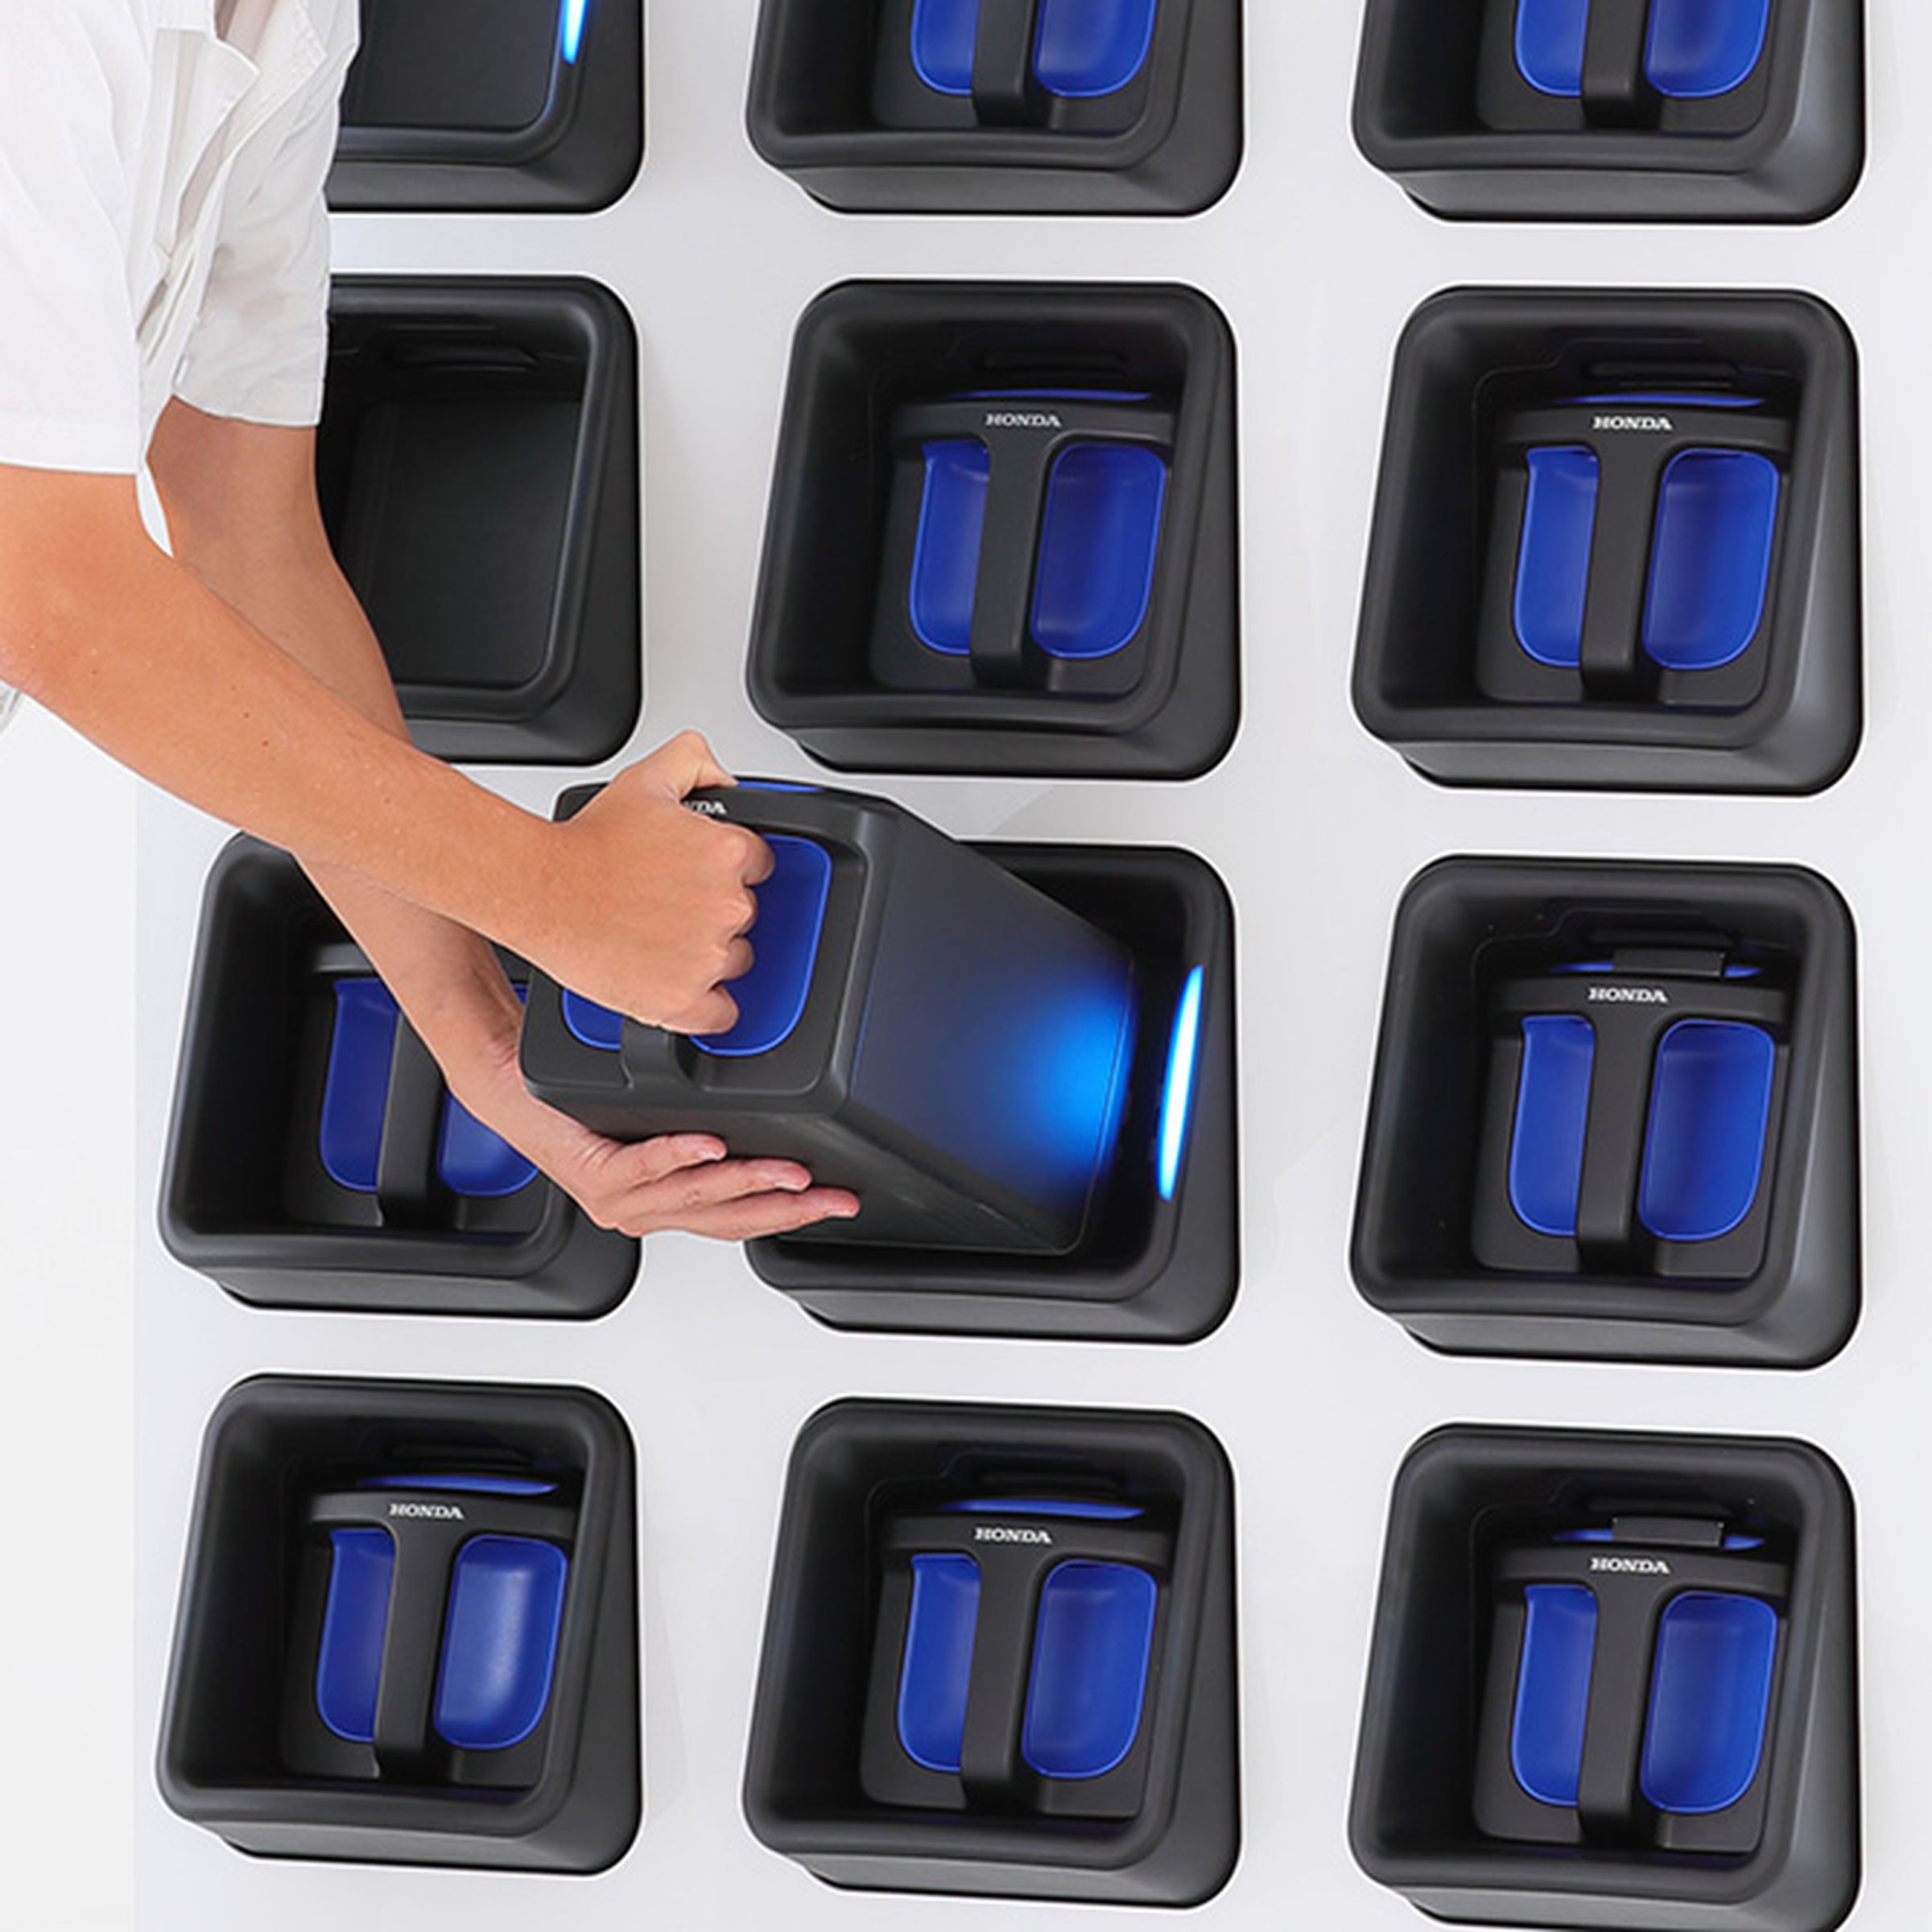 A man is pulling out a battery pack from an angled slot amongst a grid of slots that have the blue packs nestled in them.